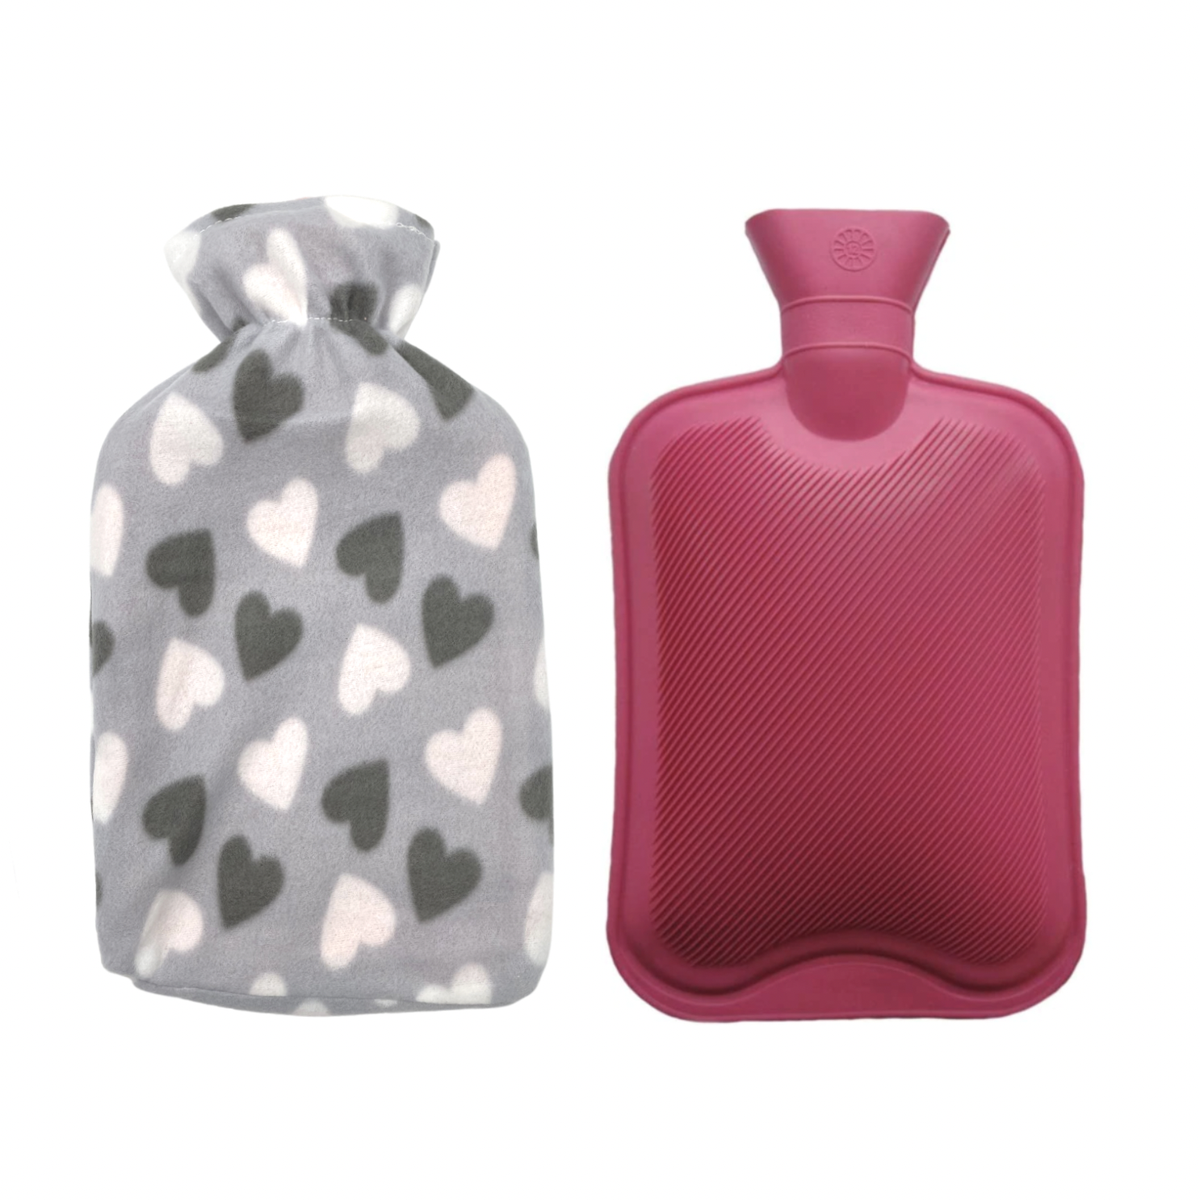 2 Pack Hot Water Bottles with Soft Fleece Cover | Shop Today. Get it ...